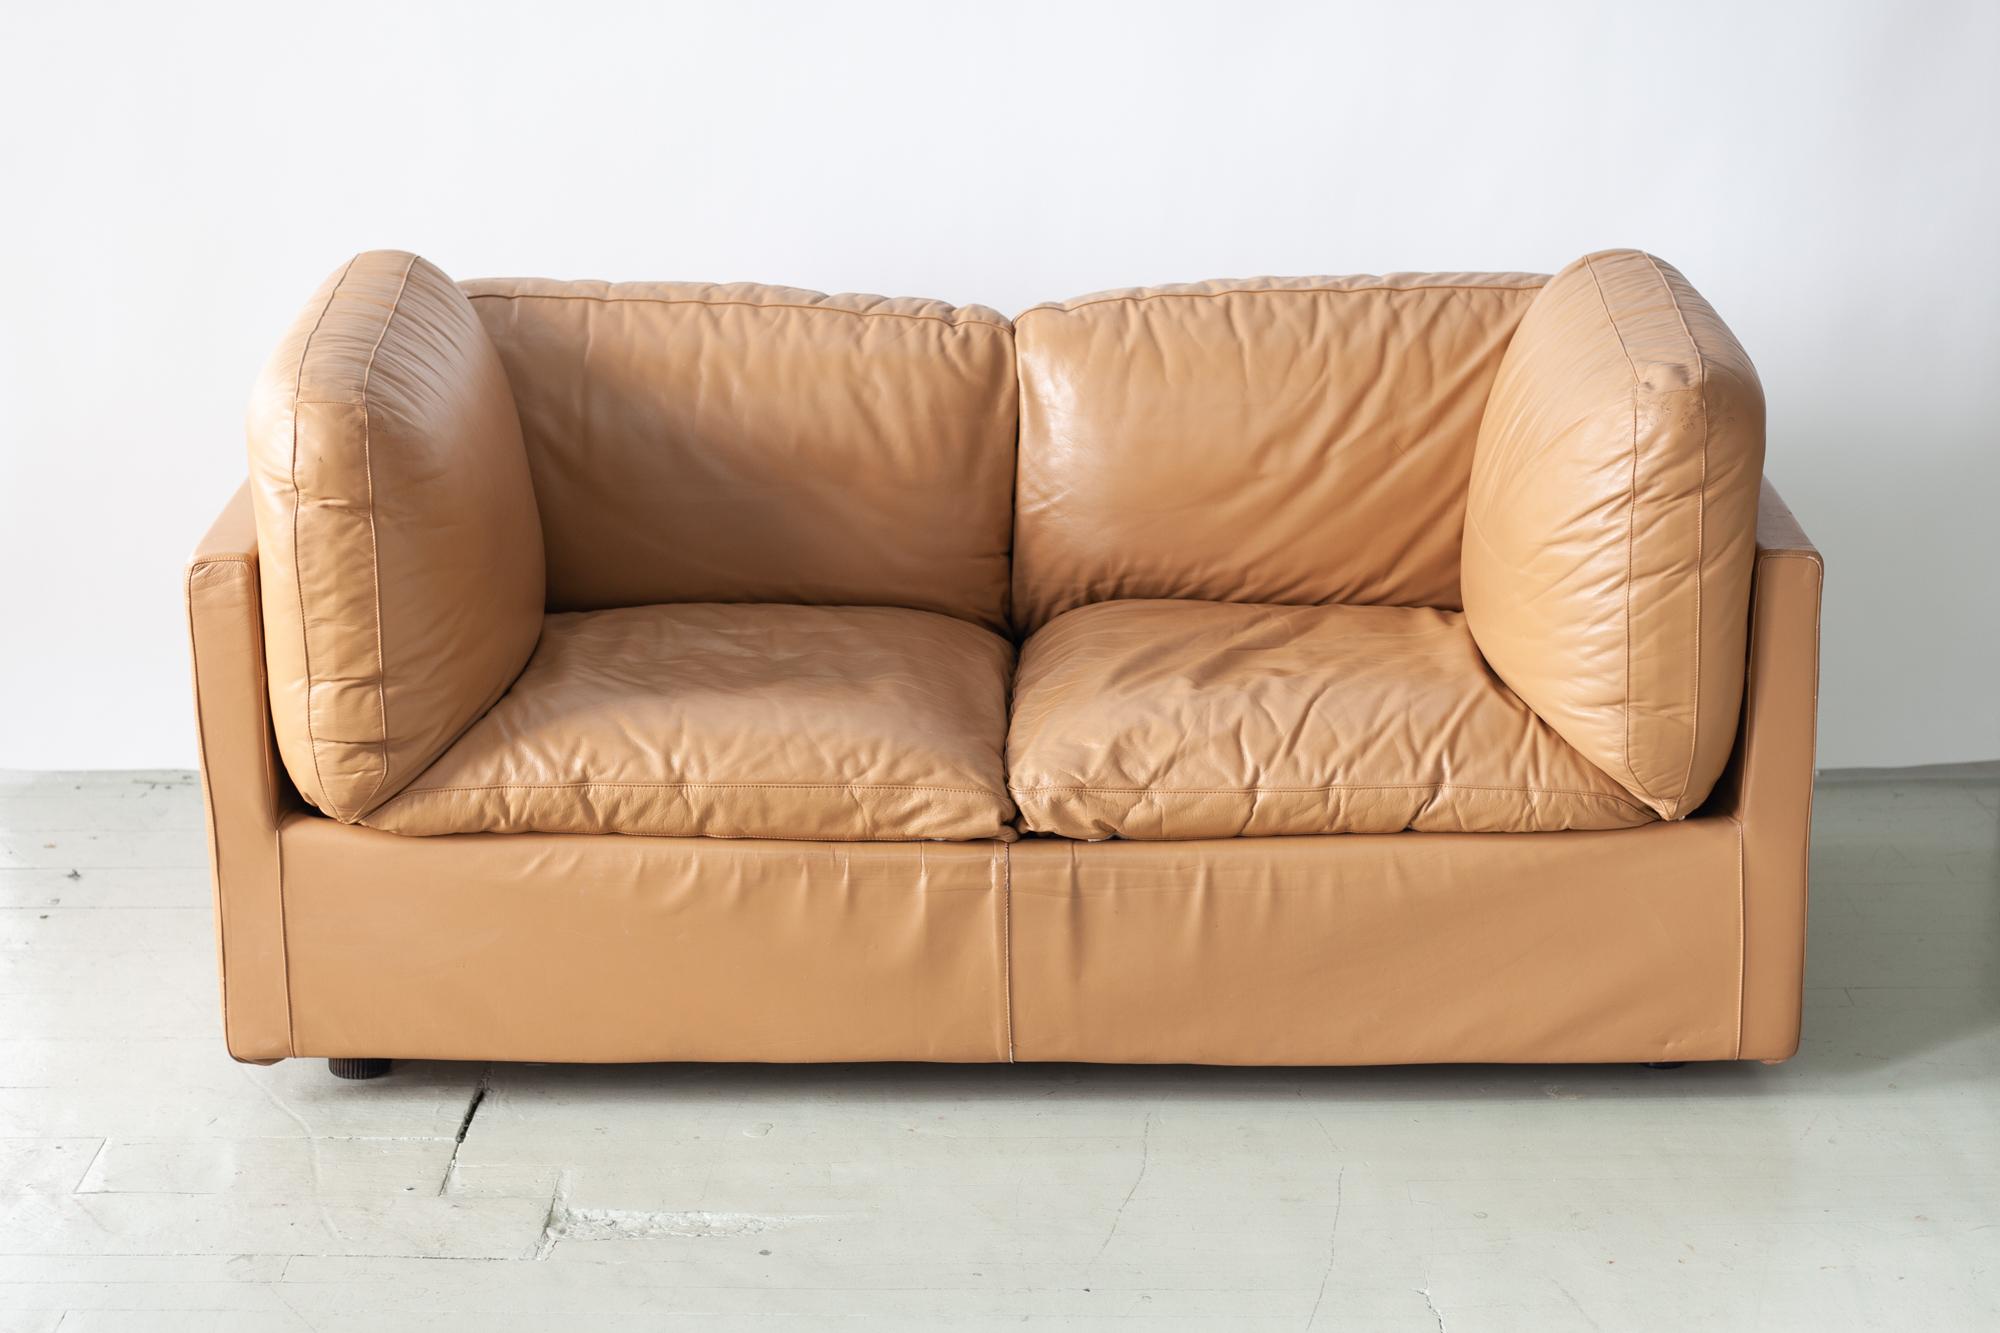 This two seat sofa/ loveseat by Jonathan De Pas, Donato D'Urbino and Paolo Lomazzi for Zanotta is a beautiful, rare piece featuring original leather upholstery made in Italy circa the 1970s. The plush seat cushions are removable and make this piece